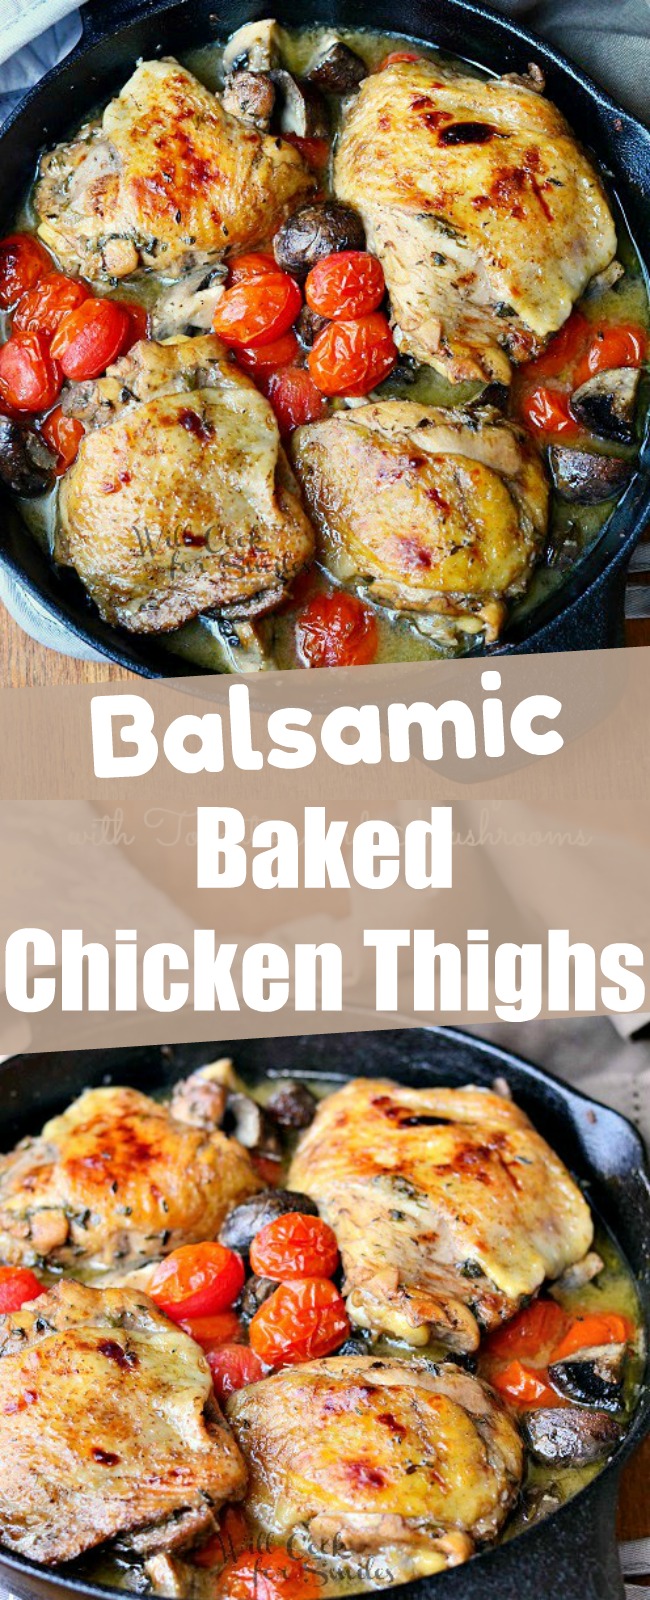 collage of two images of top view baked chicken thighs in a skillet on top and side view on the bottom